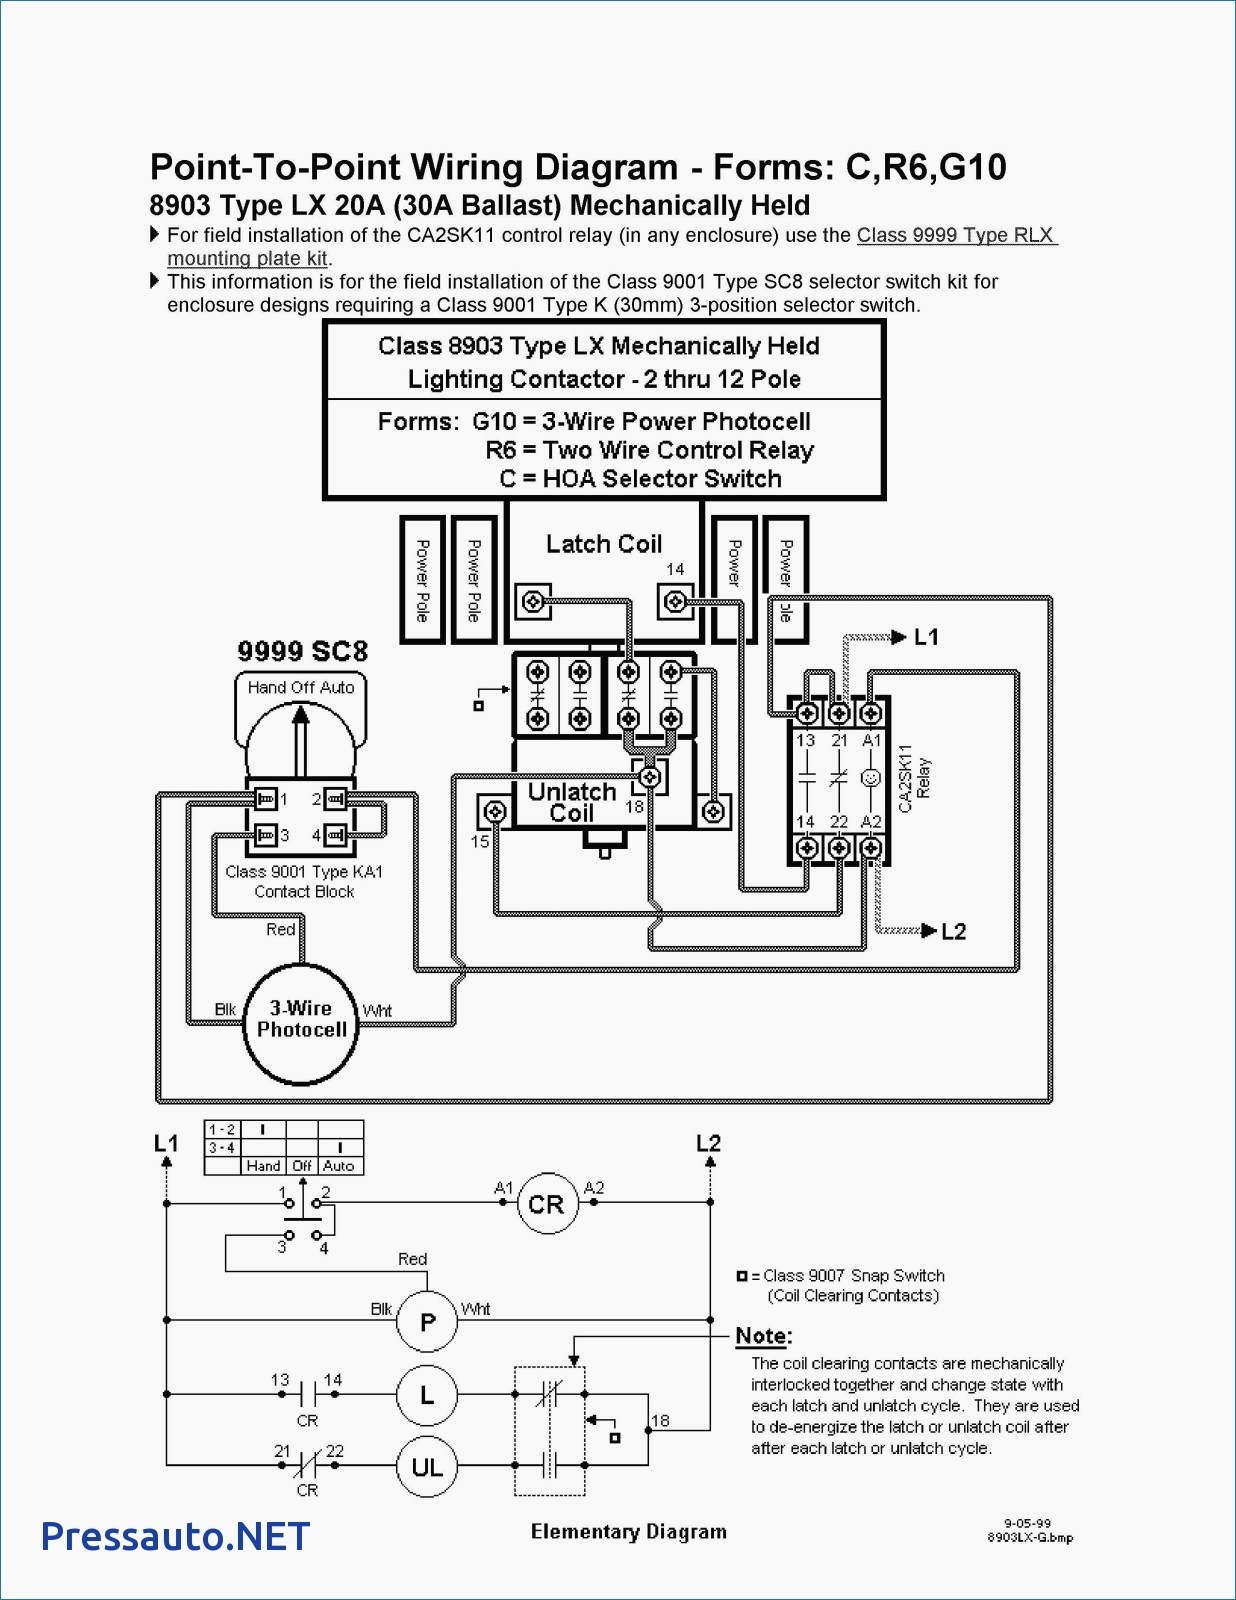 Lighting Contactor Wiring Diagram With cell Electrical Circuit Square D 8903 Lighting Contactor Wiring Diagram Download